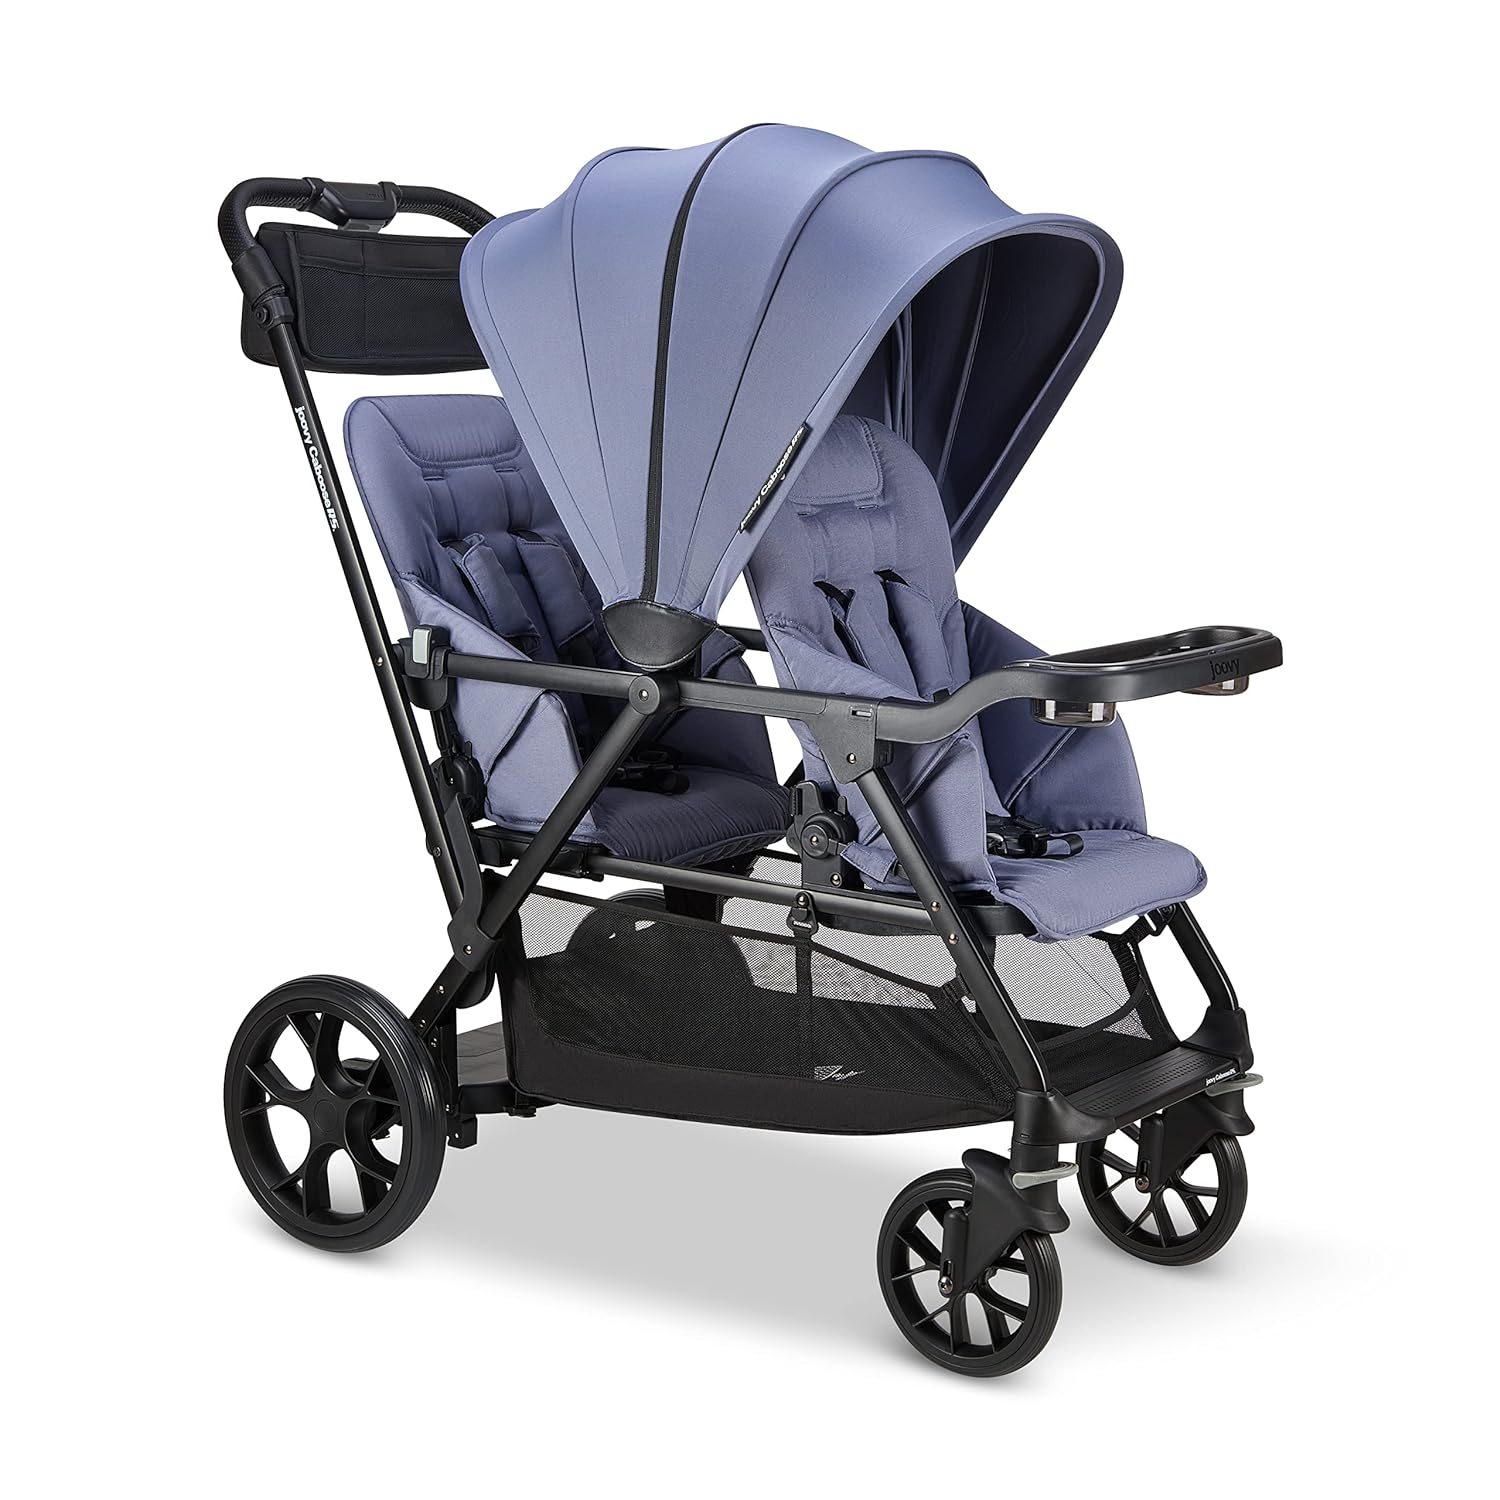 Joovy Caboose RS Rear Seat, Slate - Joovy Caboose RS Rear Seat Review